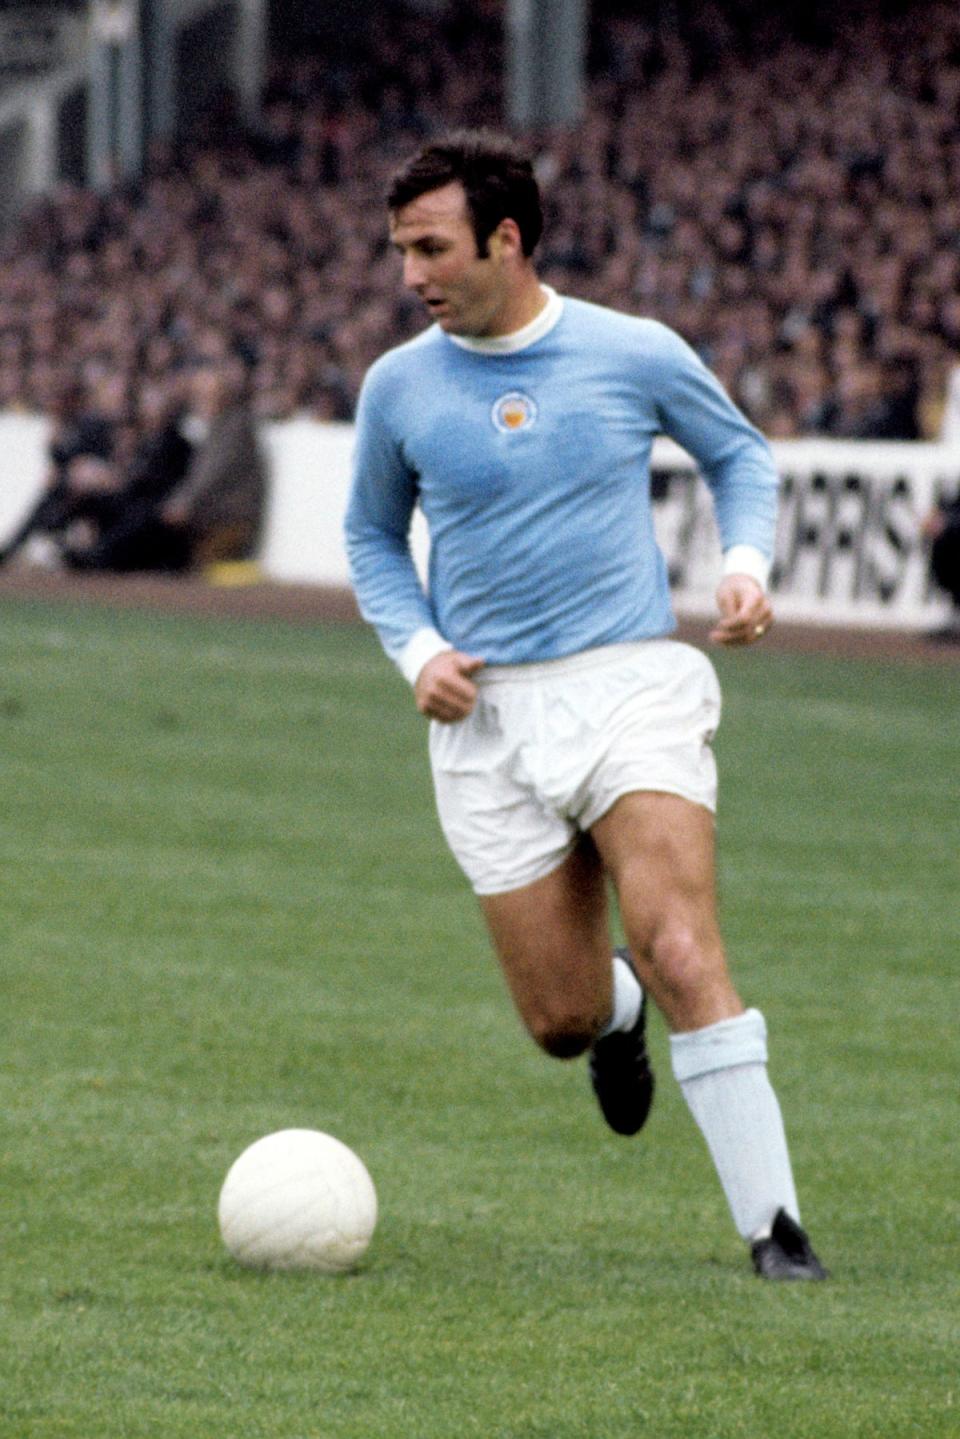 Tommy Doyle’s grandfather Glyn Pardoe played ay Wembley for Man City (PA)